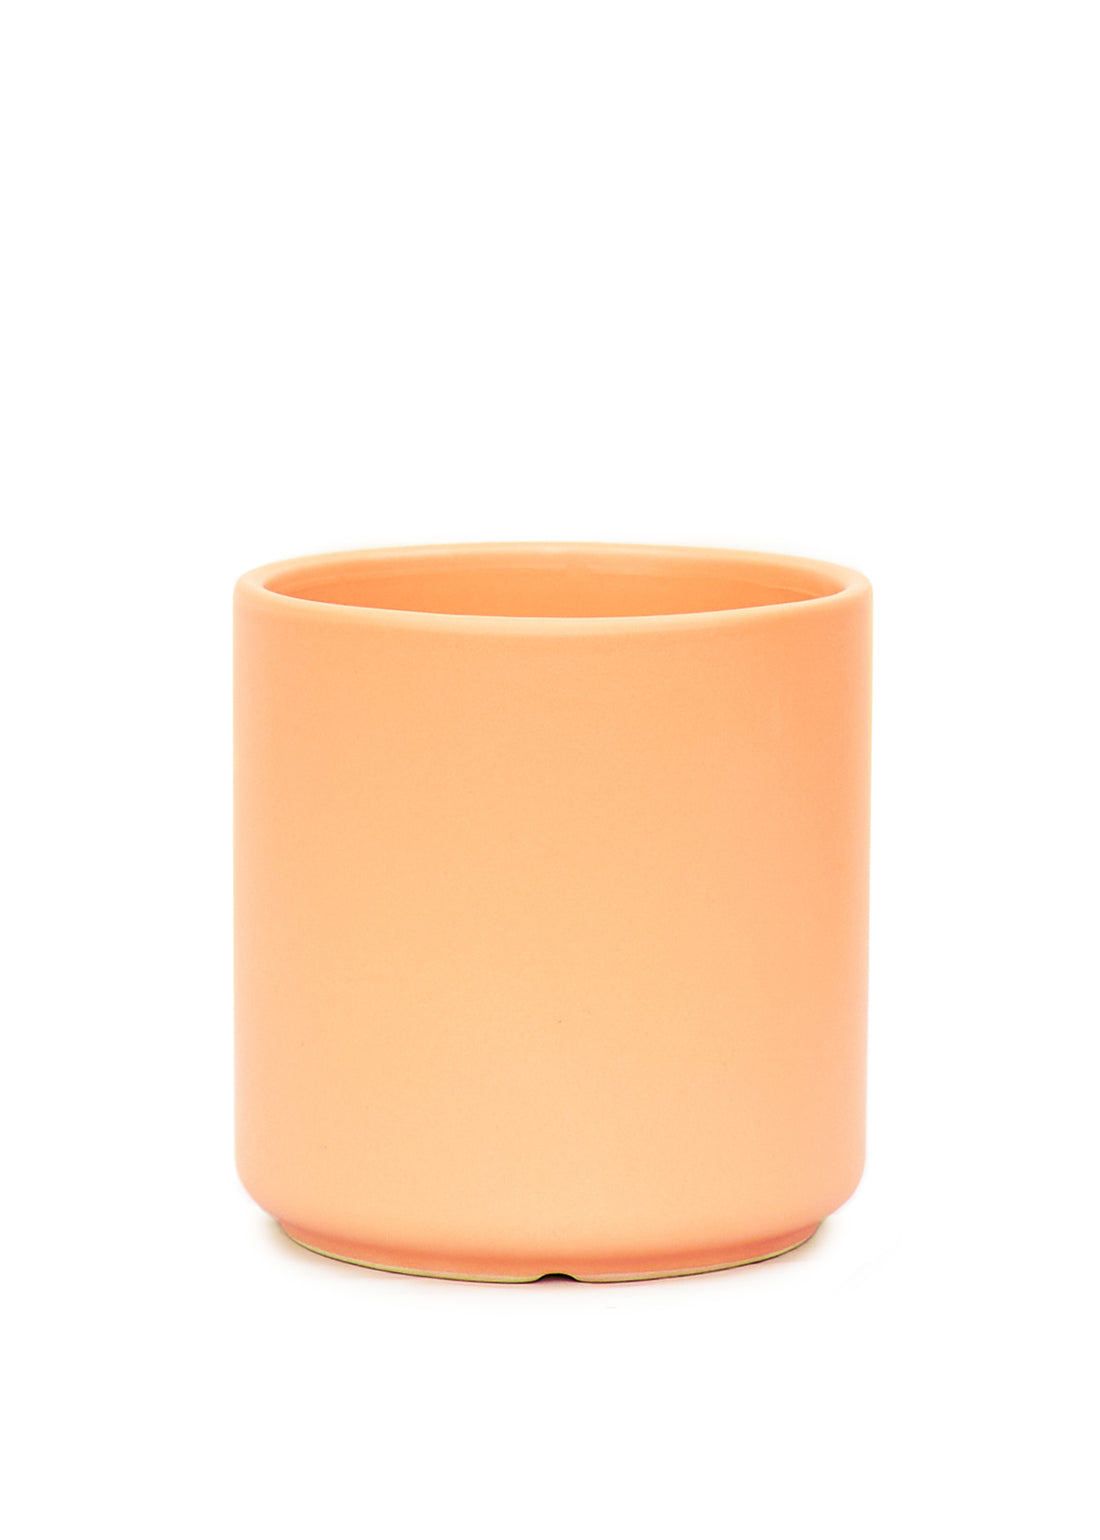 Cylindrical Ceramic Planter, Peach 7&quot; Wide - Plantboy - 